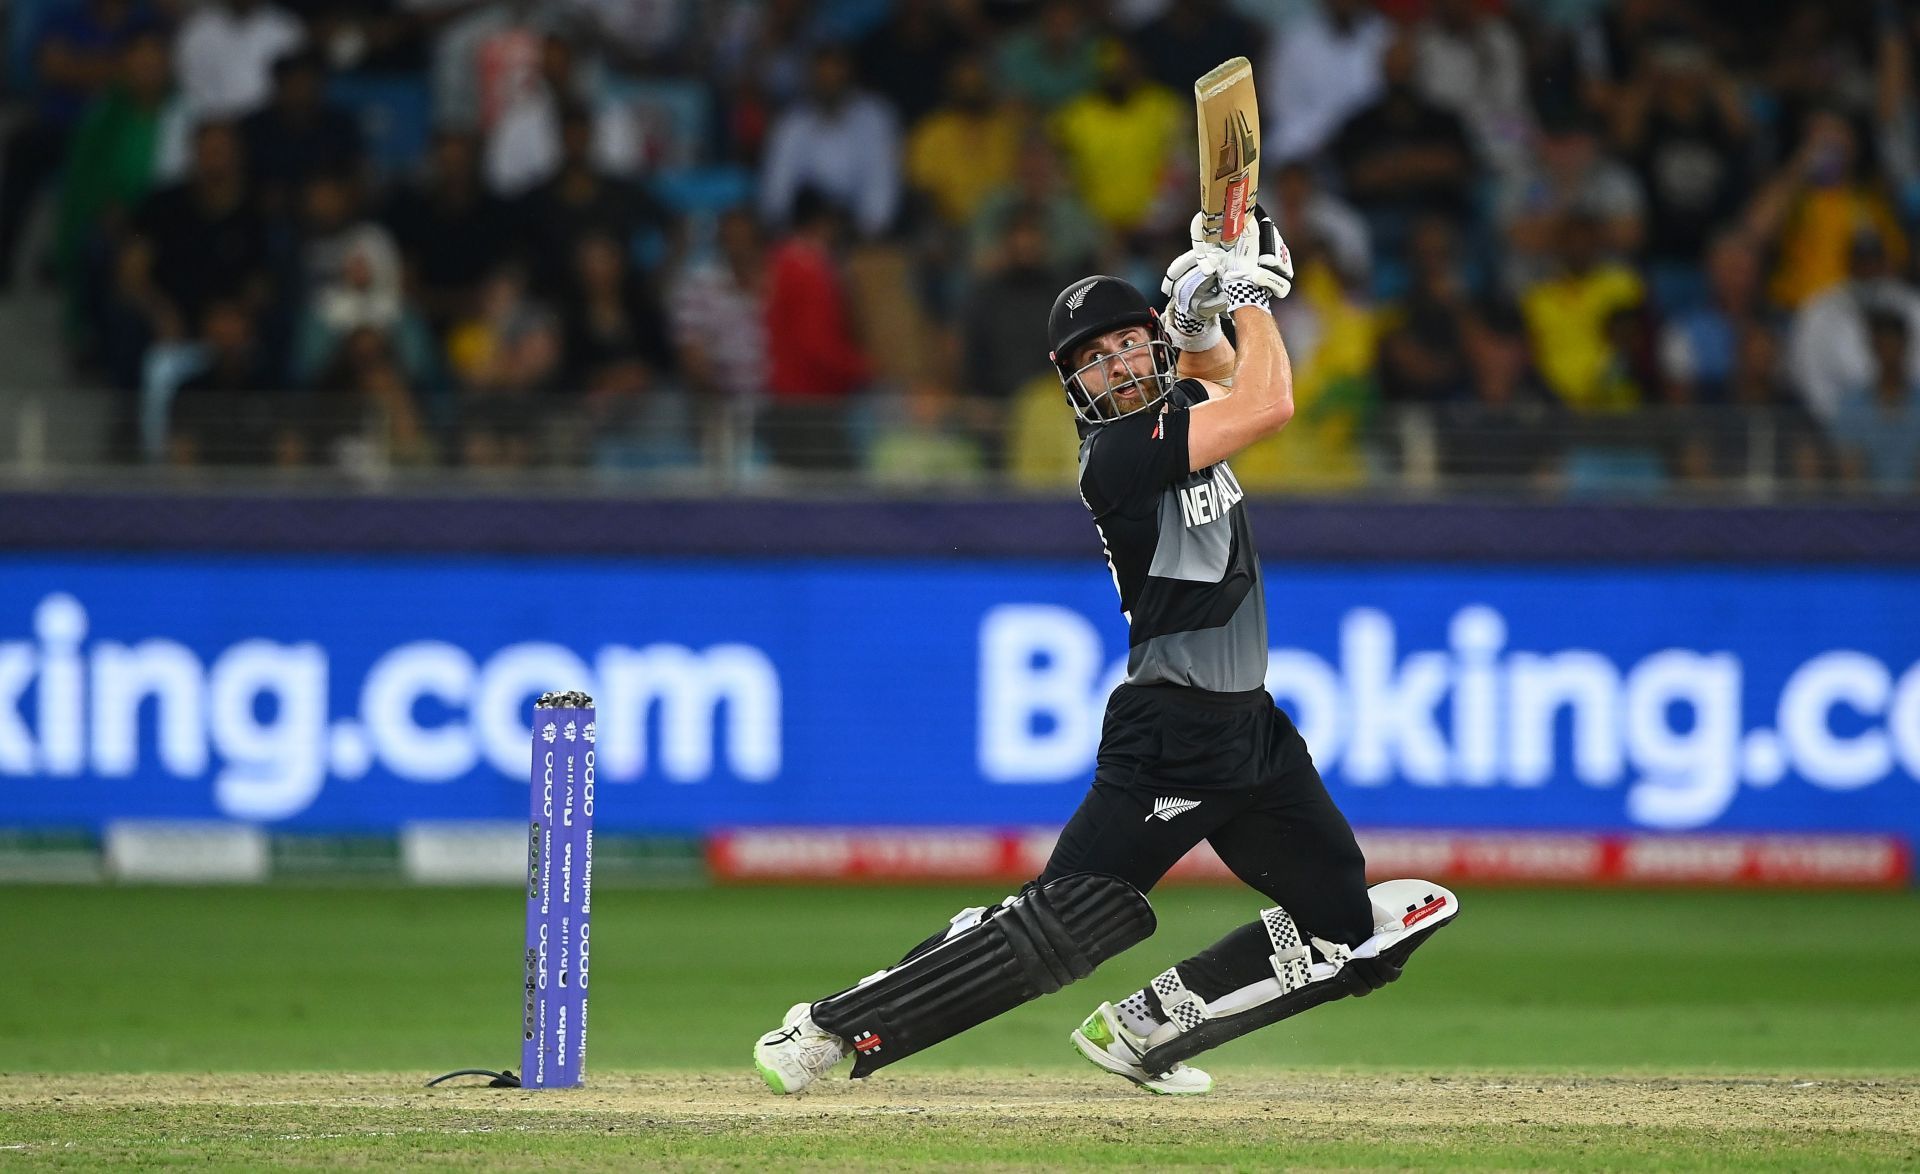 Kane Williamson was at his elegant yet dangerous best in the 2021 T20 World Cup final.